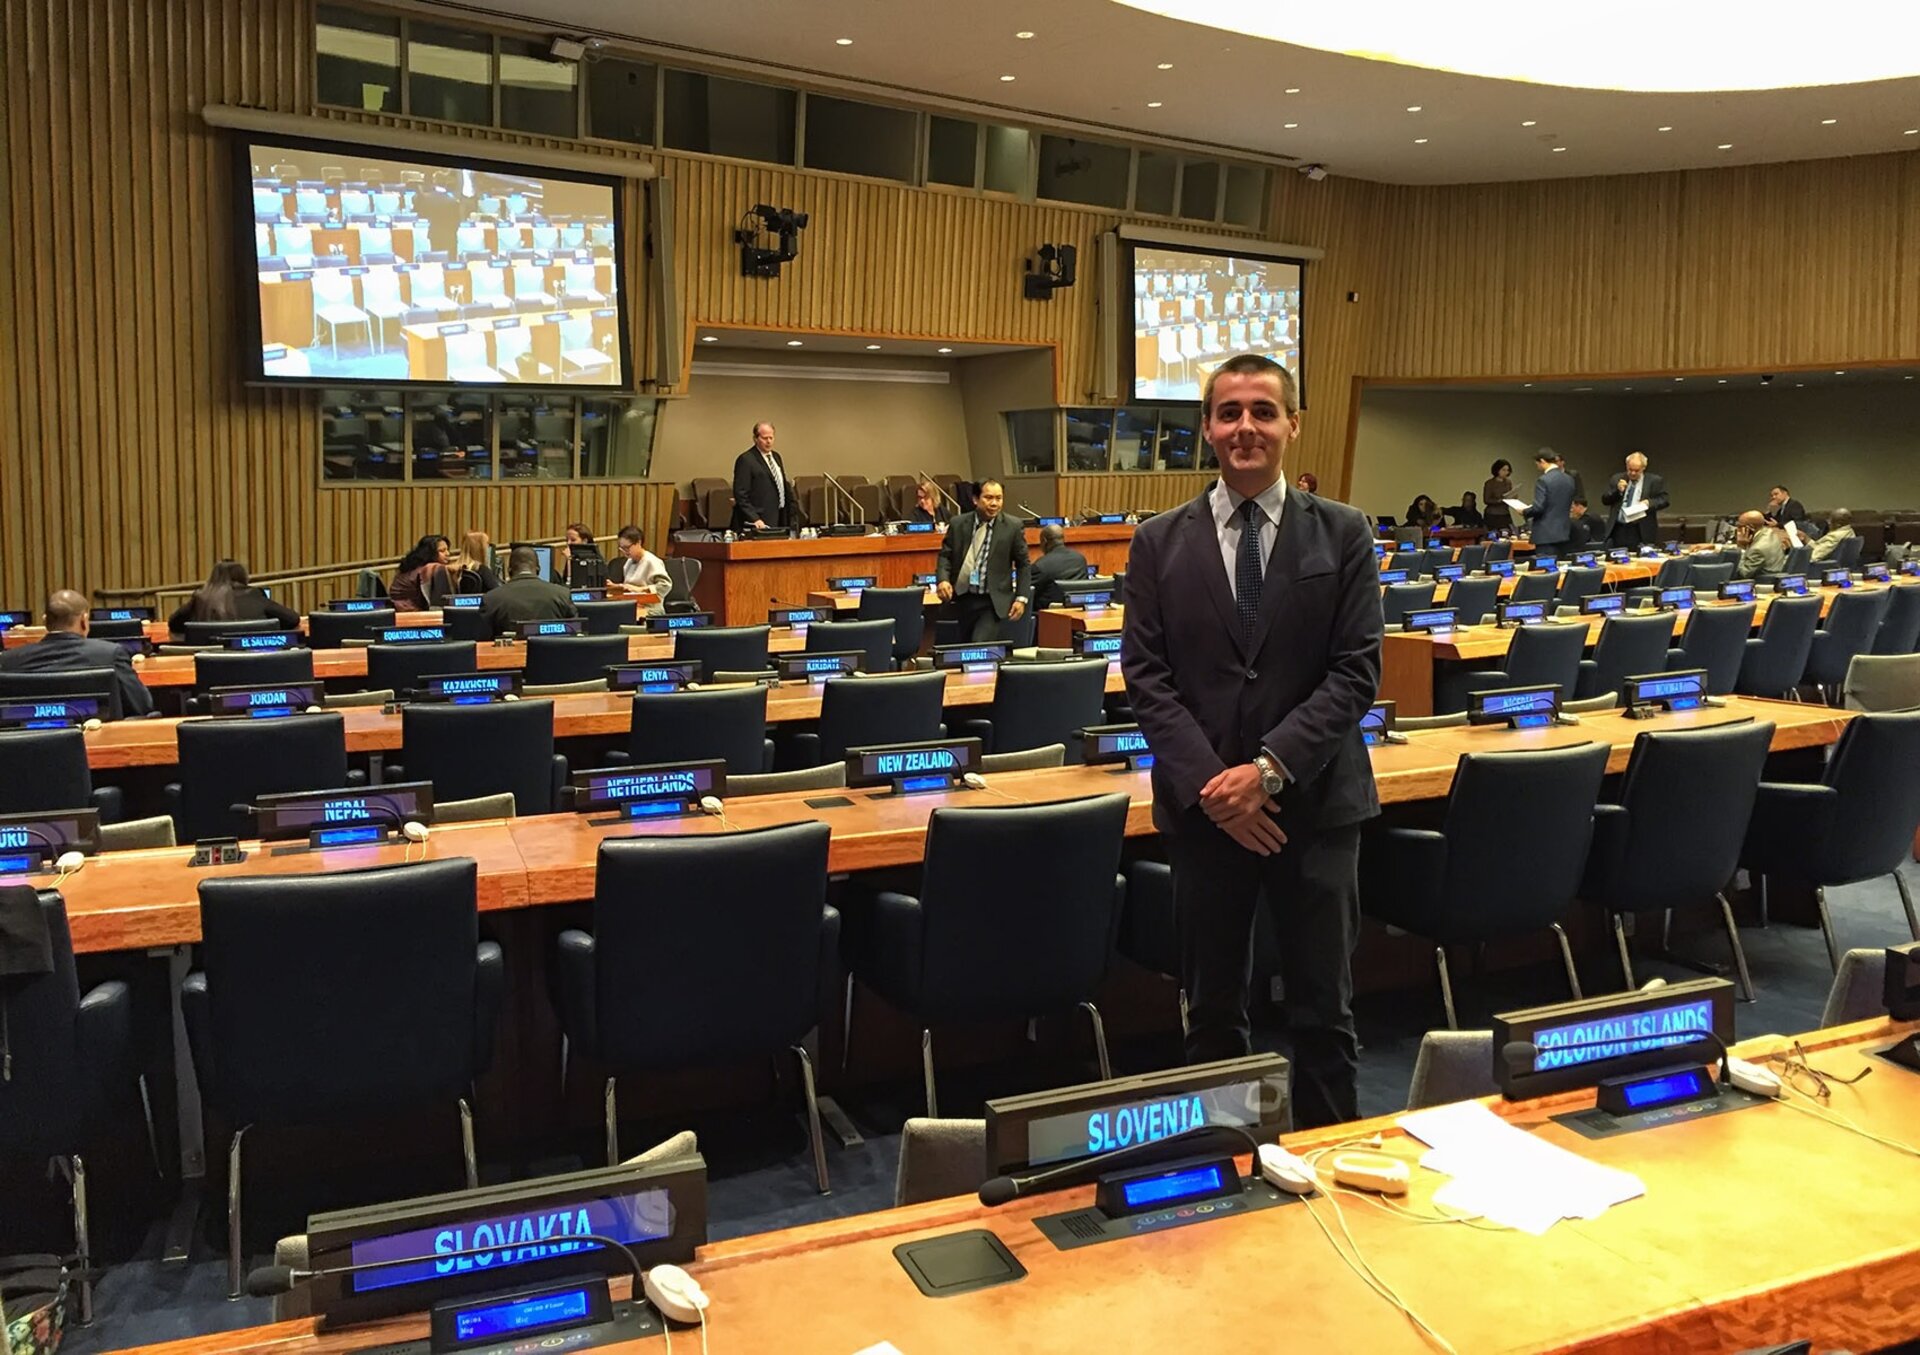 Tomas at the 4th Committee of UNGA when it was dealing with space, from 2016 sessions